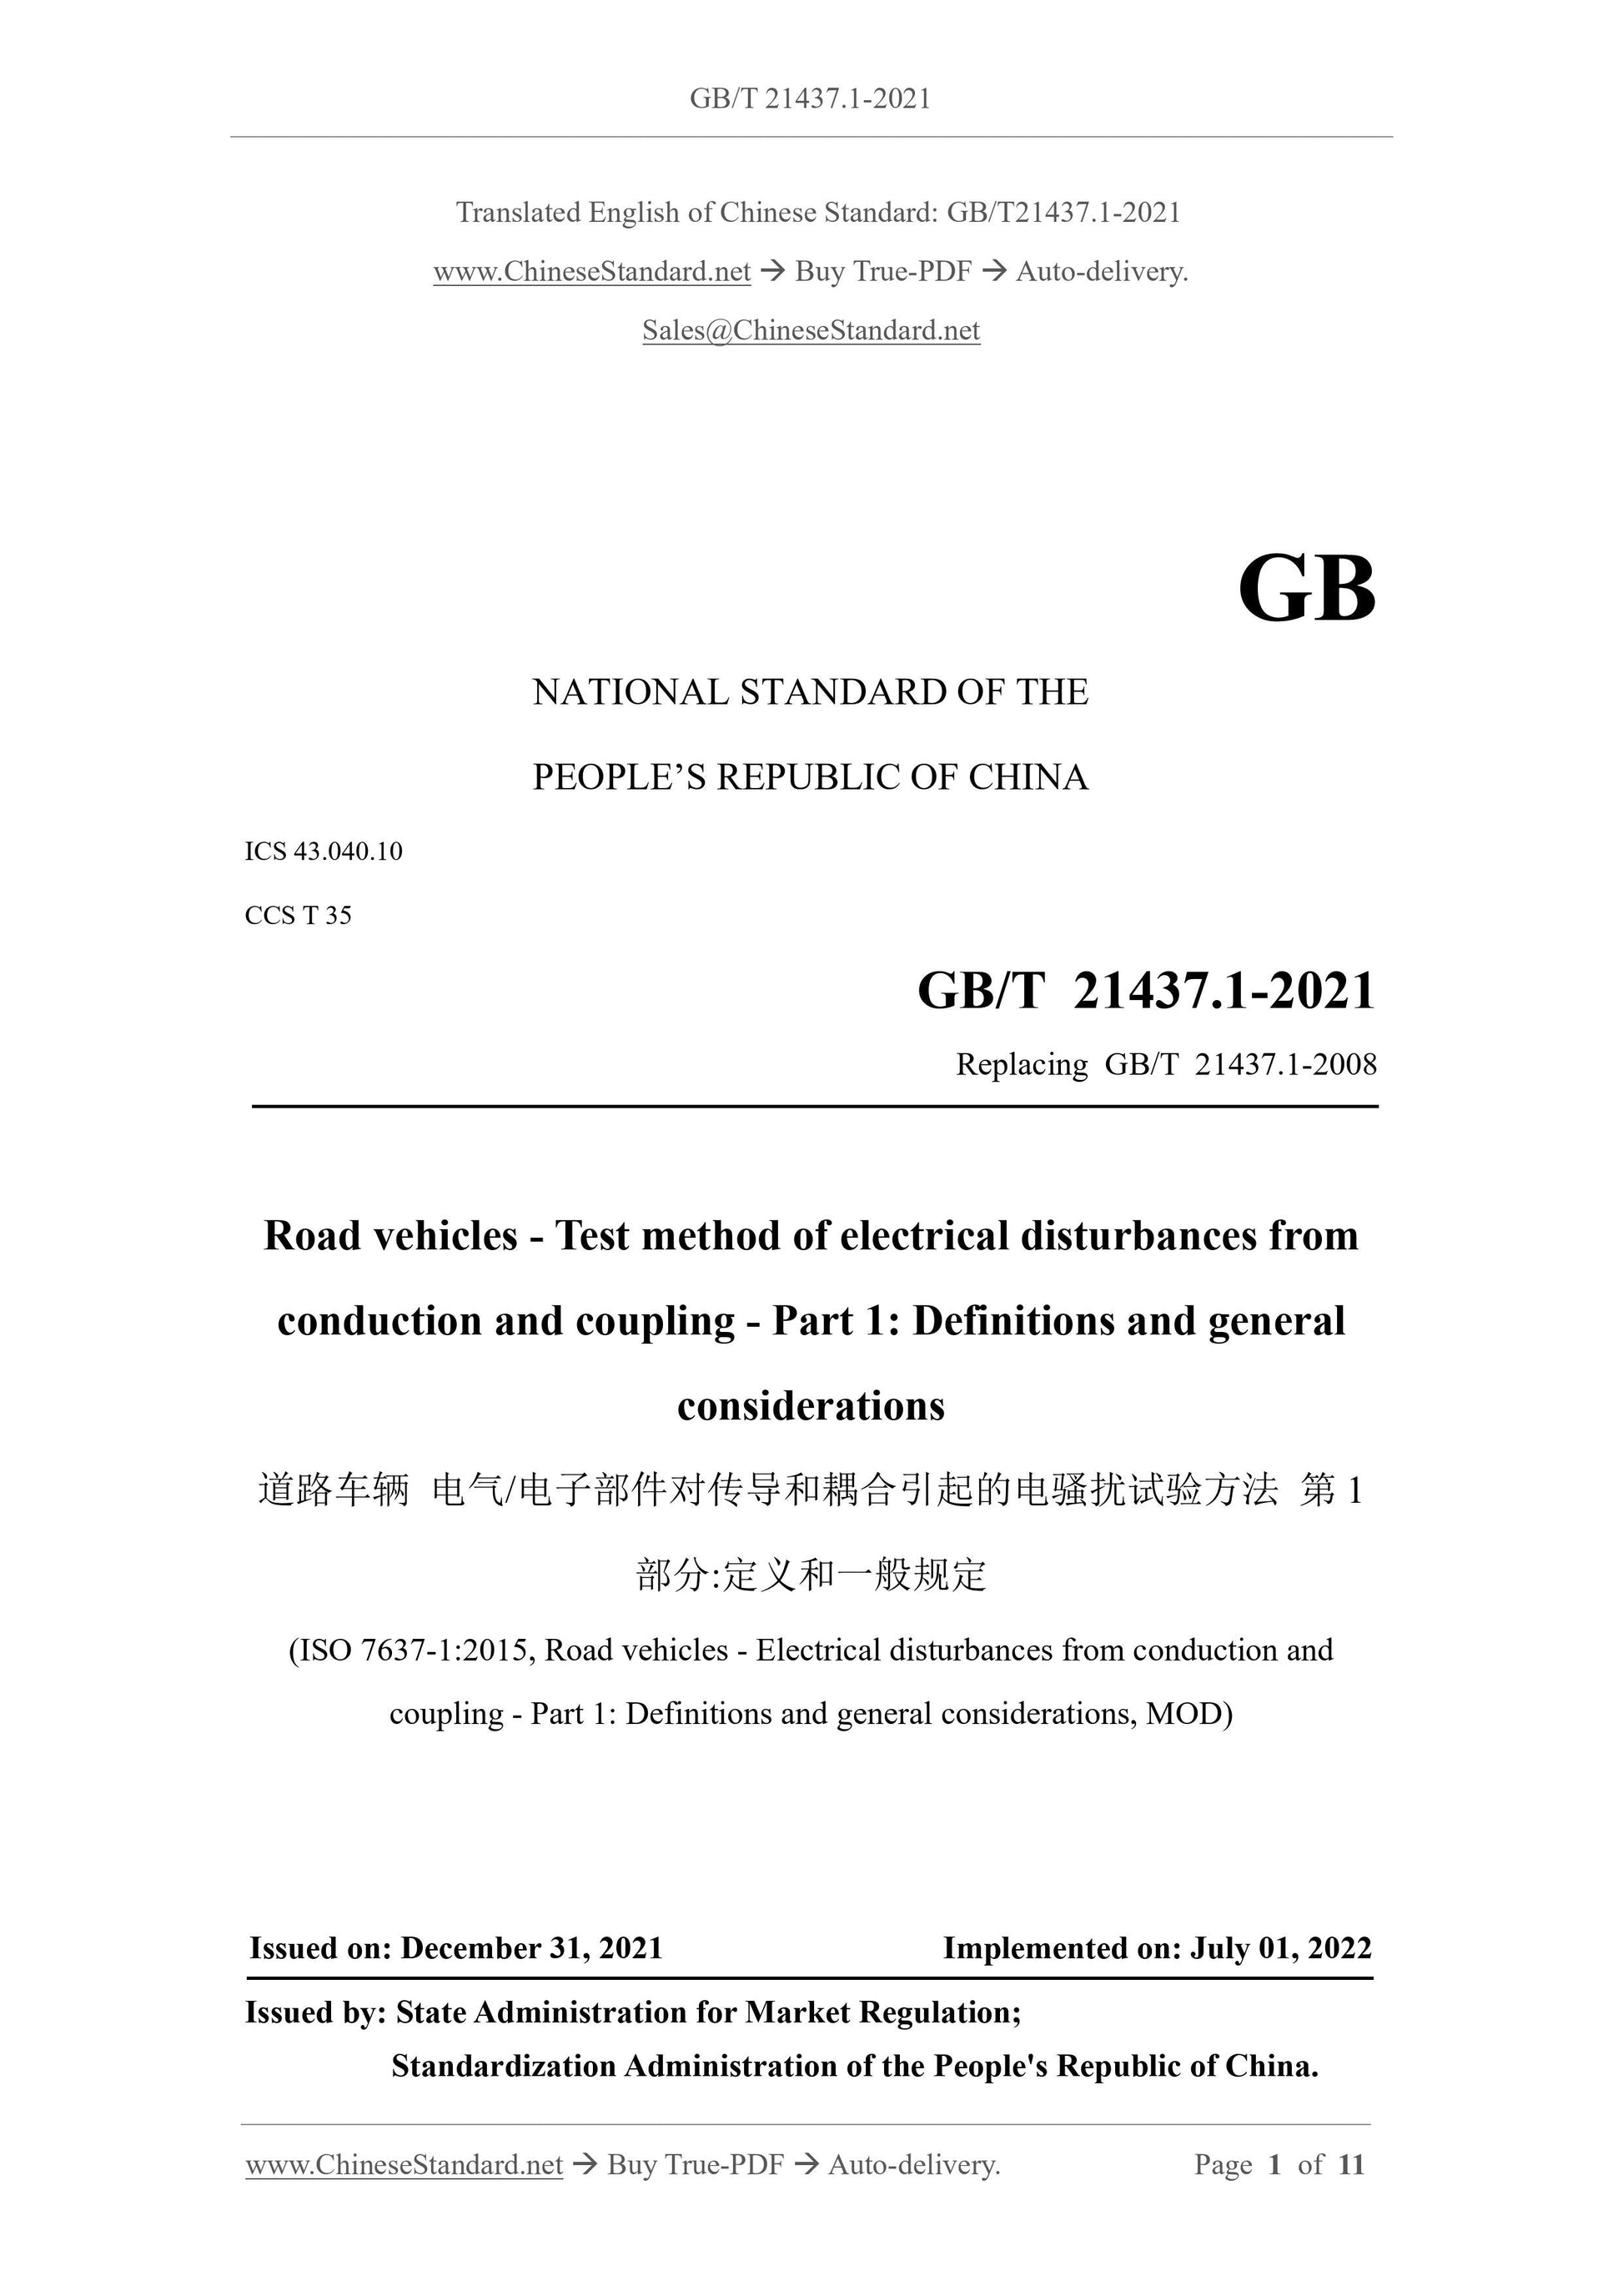 GB/T 21437.1-2021 Page 1